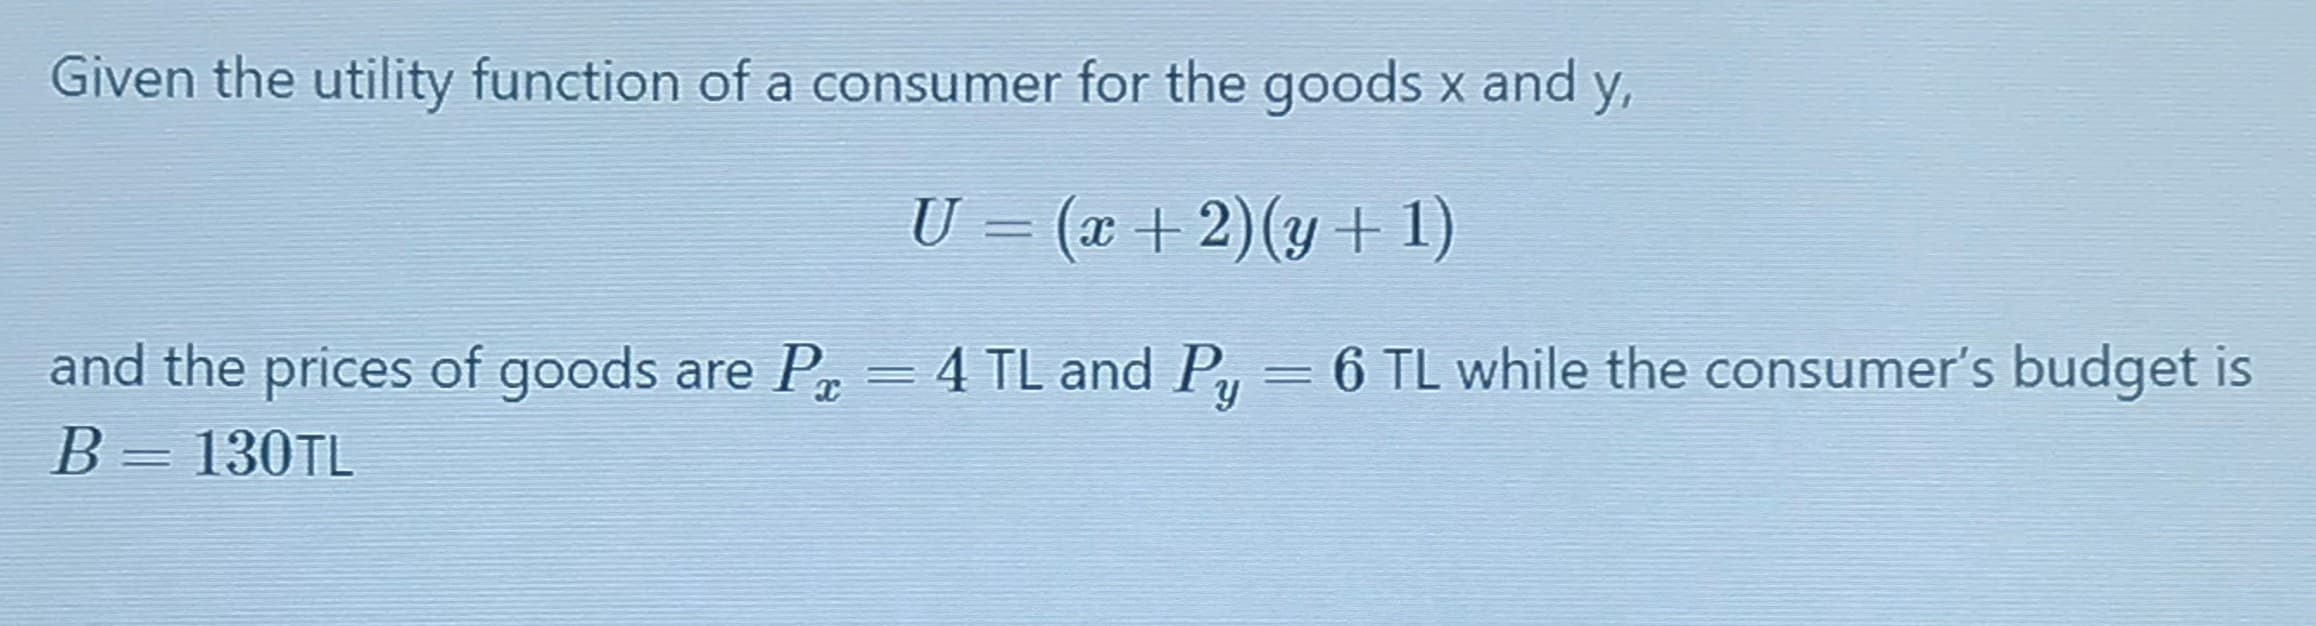 Given the utility function of a consumer for the goods x and y,
U = (x + 2)(y+ 1)
and the prices of goods are P = 4 TL and P, = 6 TL while the consumer's budget is
В - 130TL
||
